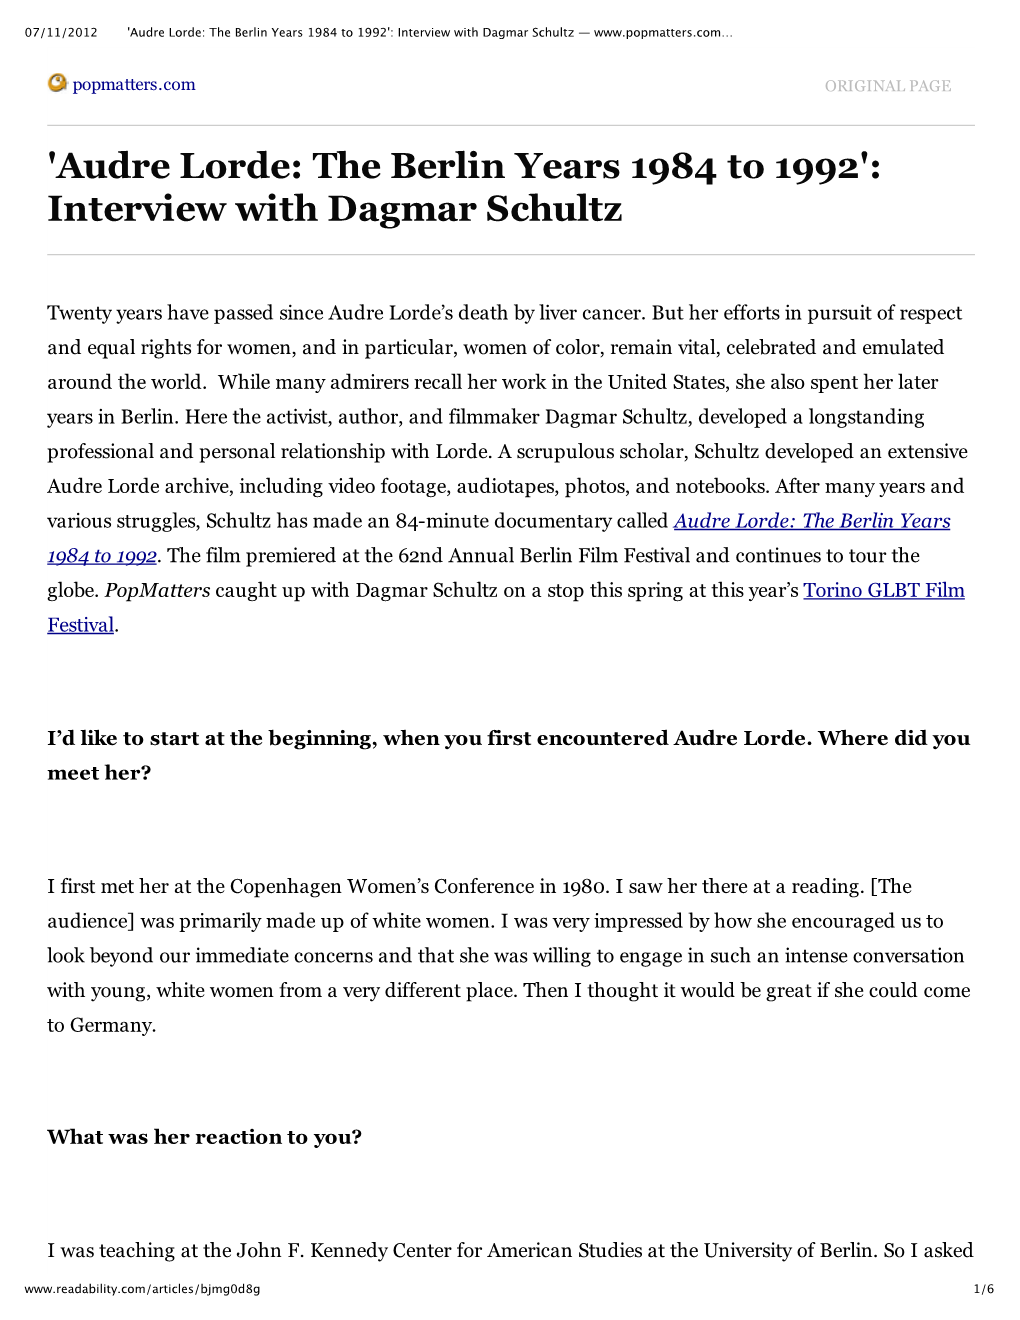 'Audre Lorde: the Berlin Years 1984 to 1992': Interview with Dagmar Schultz —